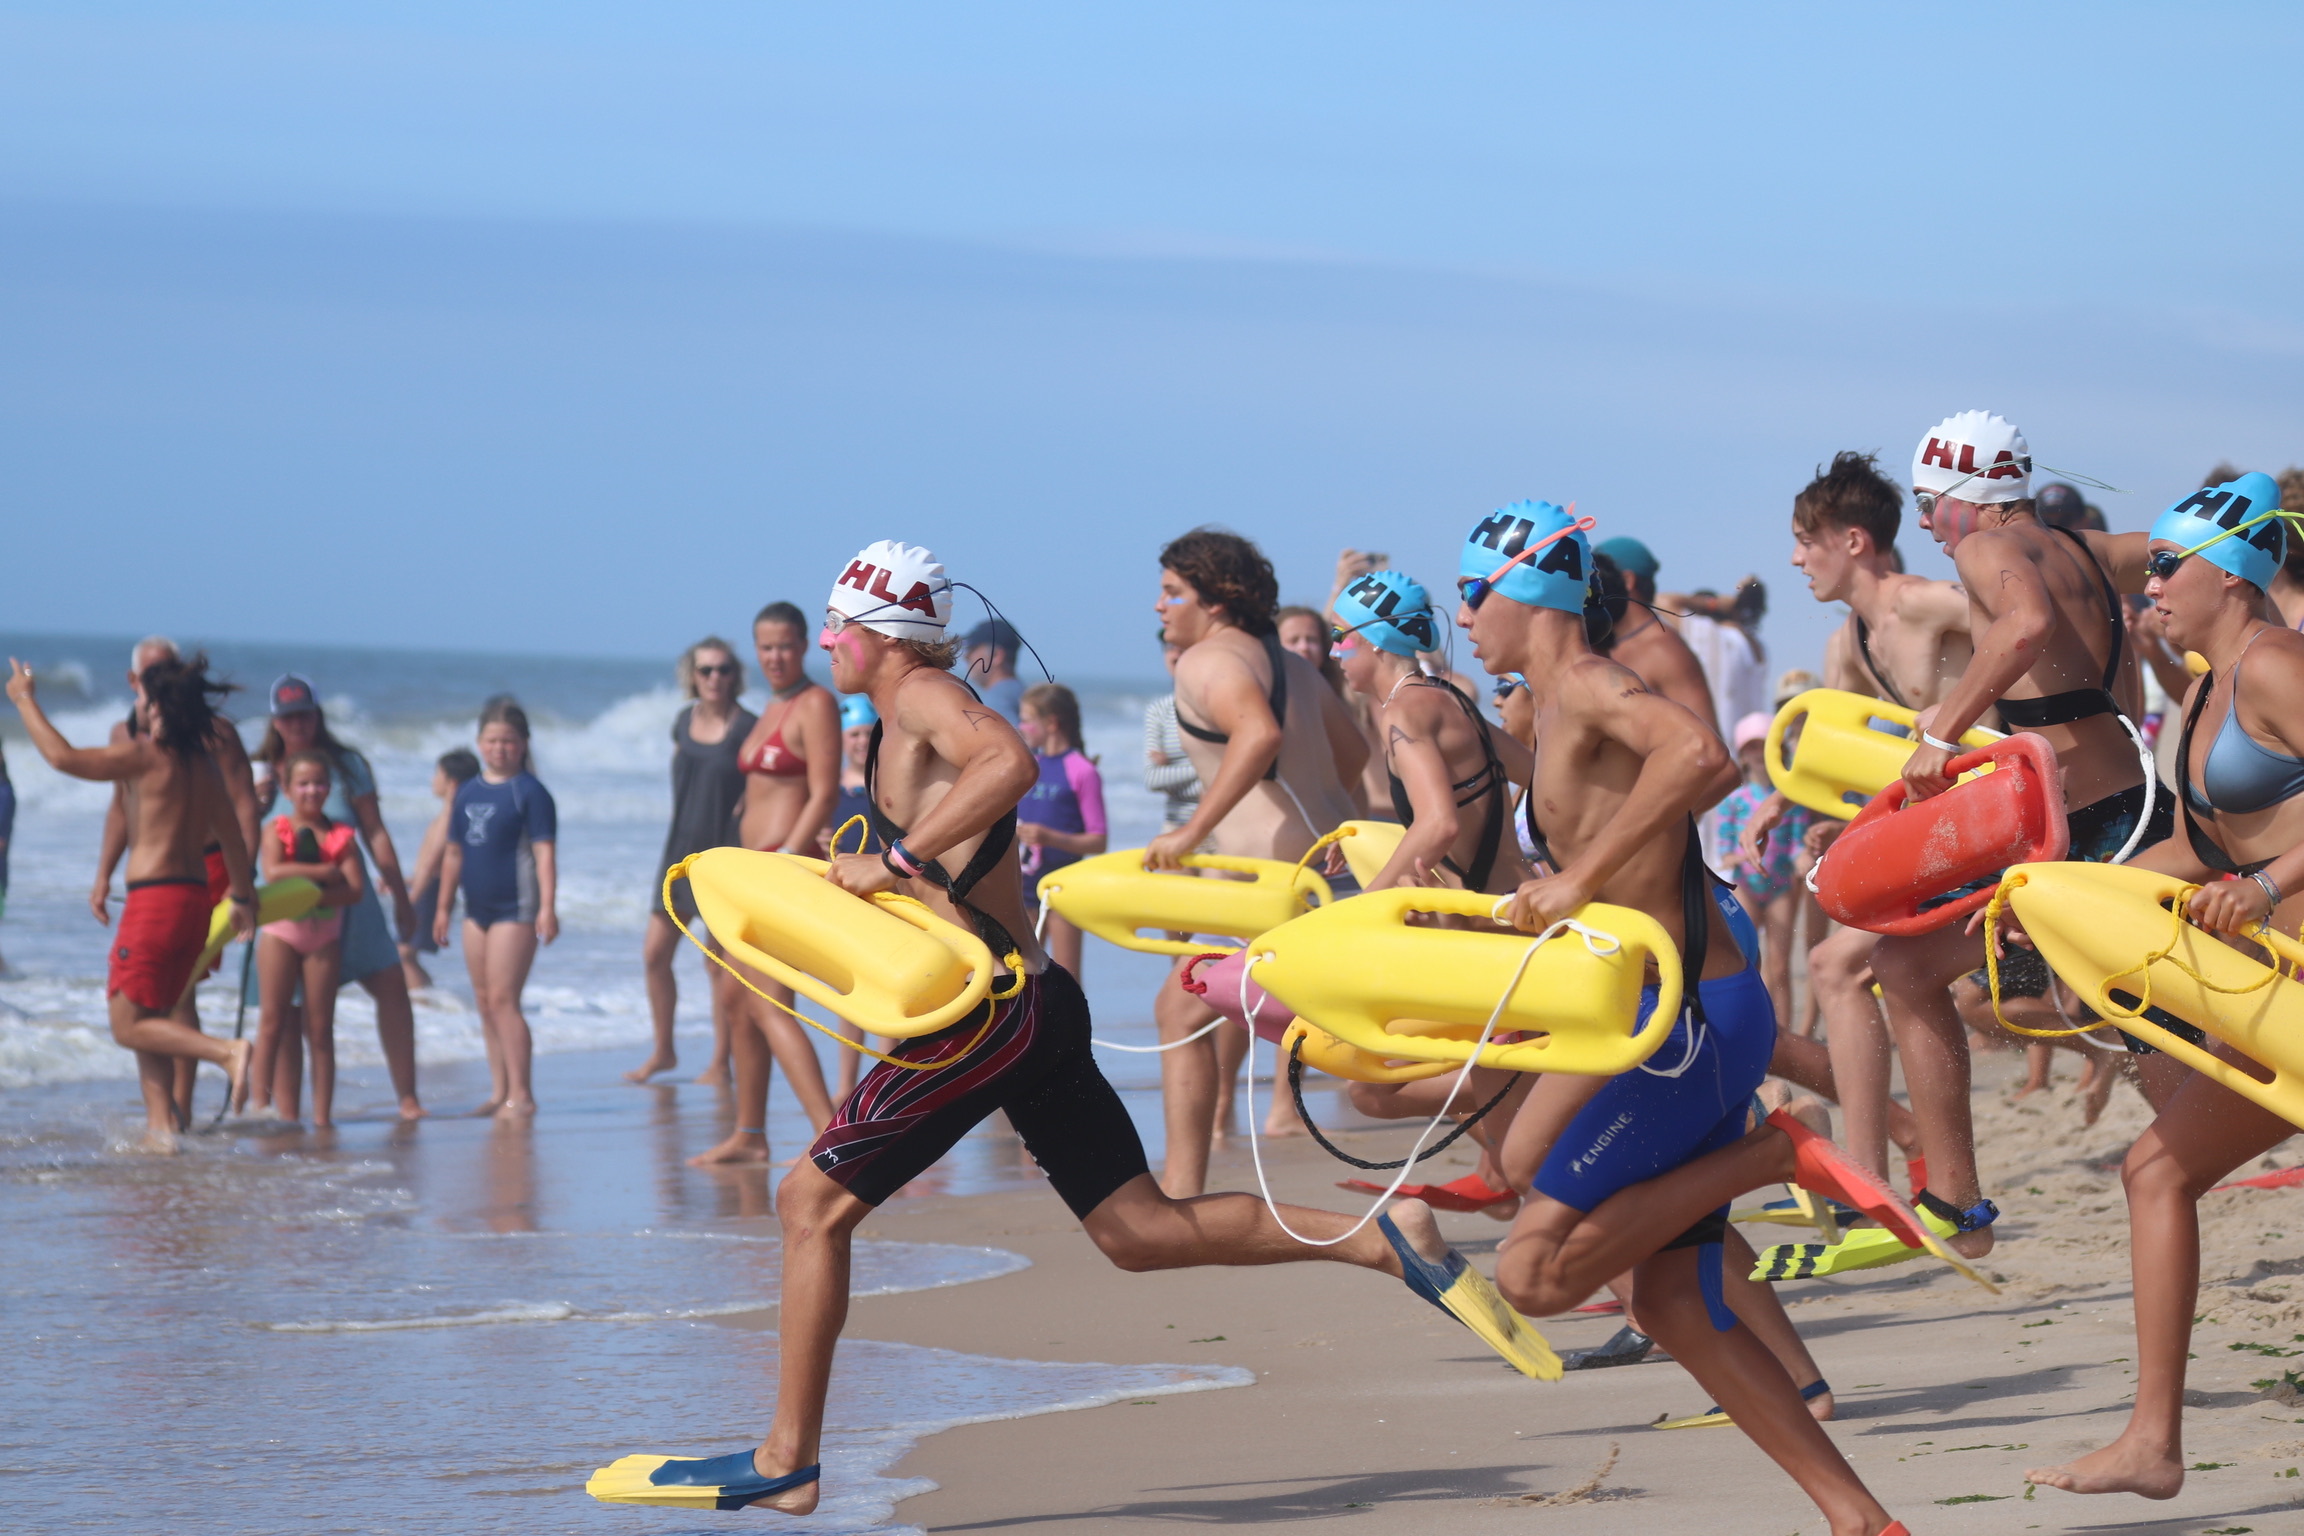 Junior Lifeguards, led by Luke Castillo, at left, enter the water in the torpedo rescue. CINTIA PARSONS